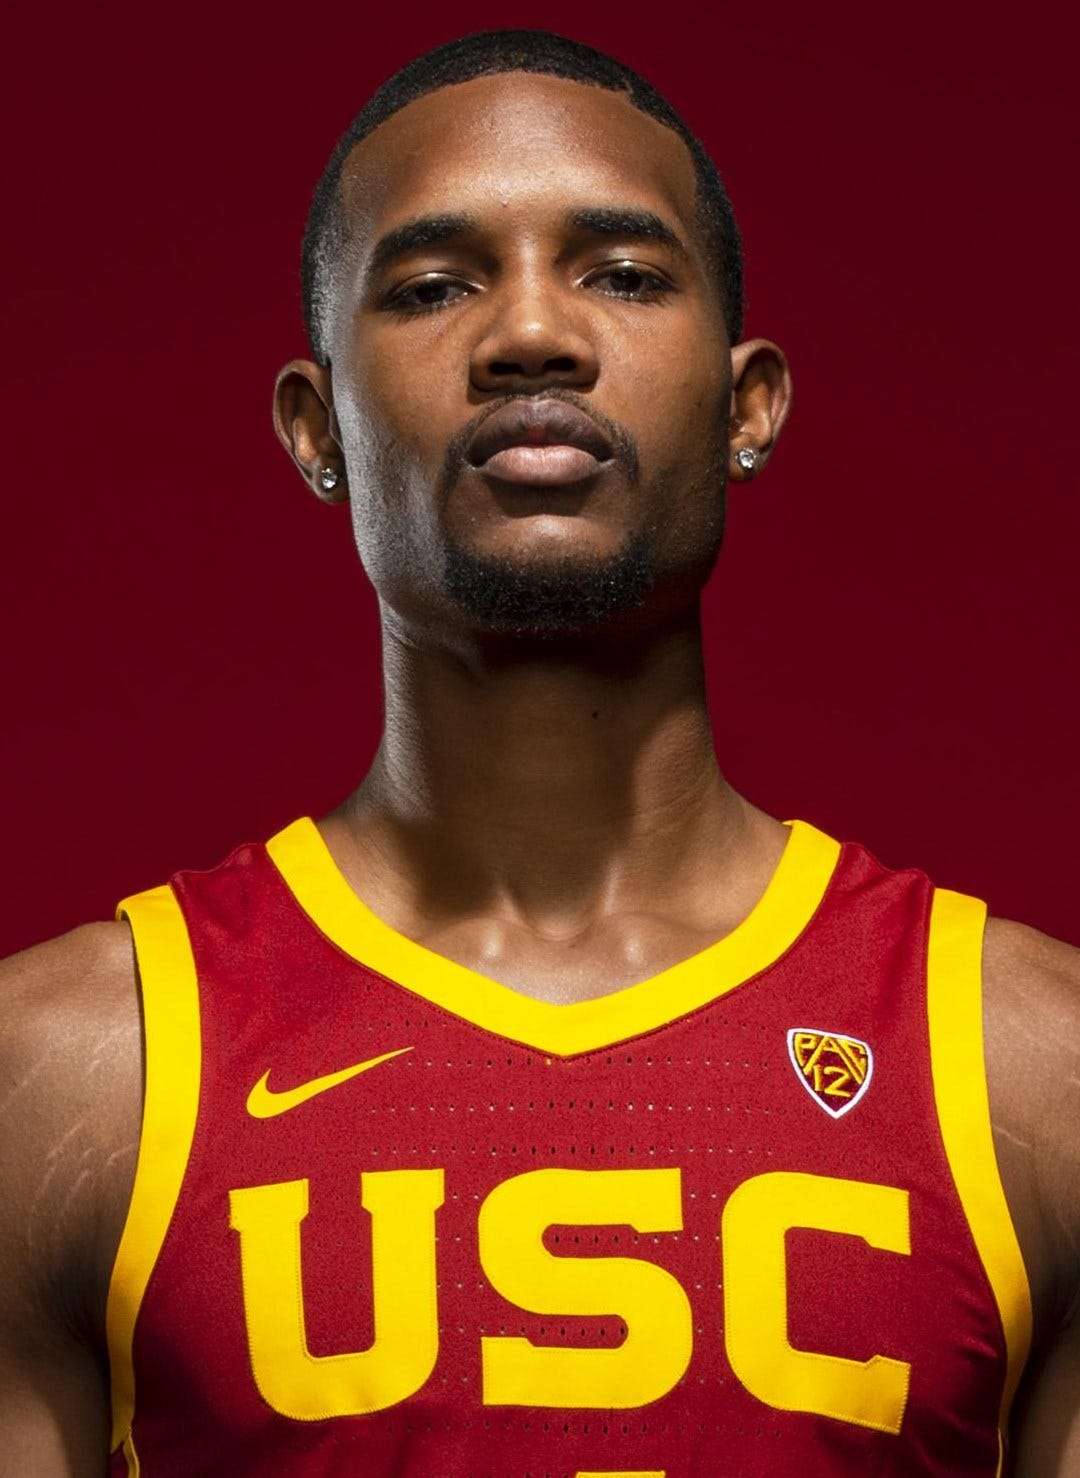 Scouting Evan Mobley